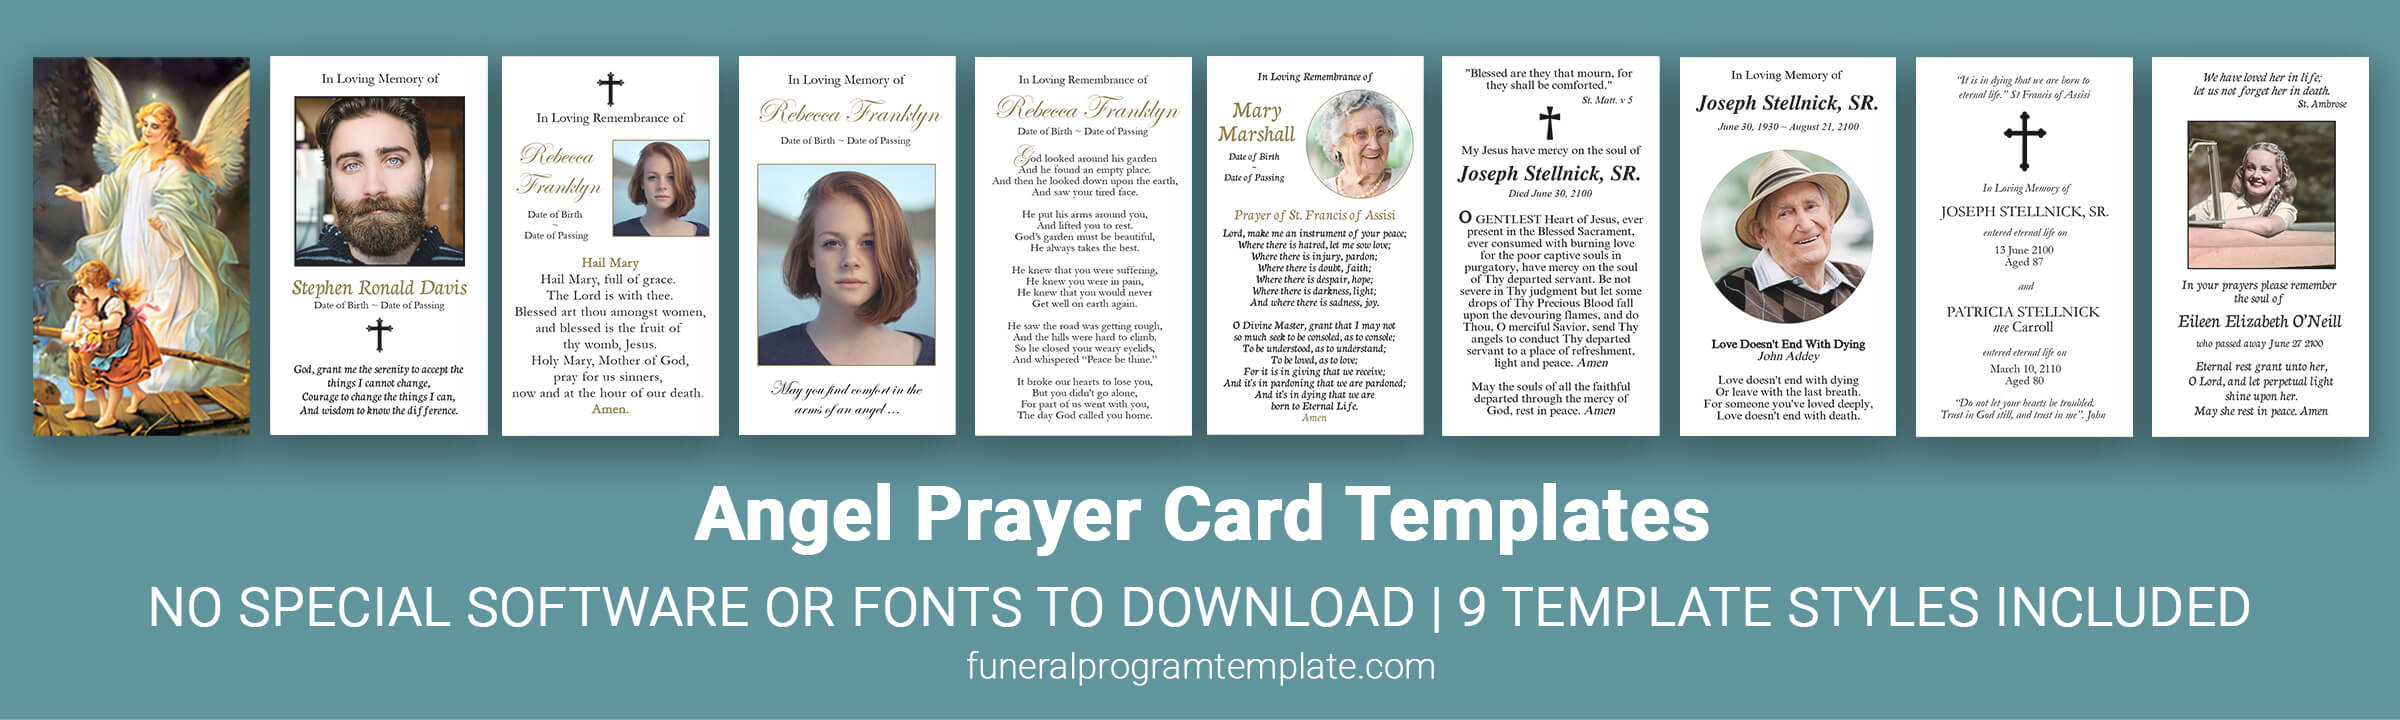 Angel Prayer Card Template includes 9 template styles to choose from